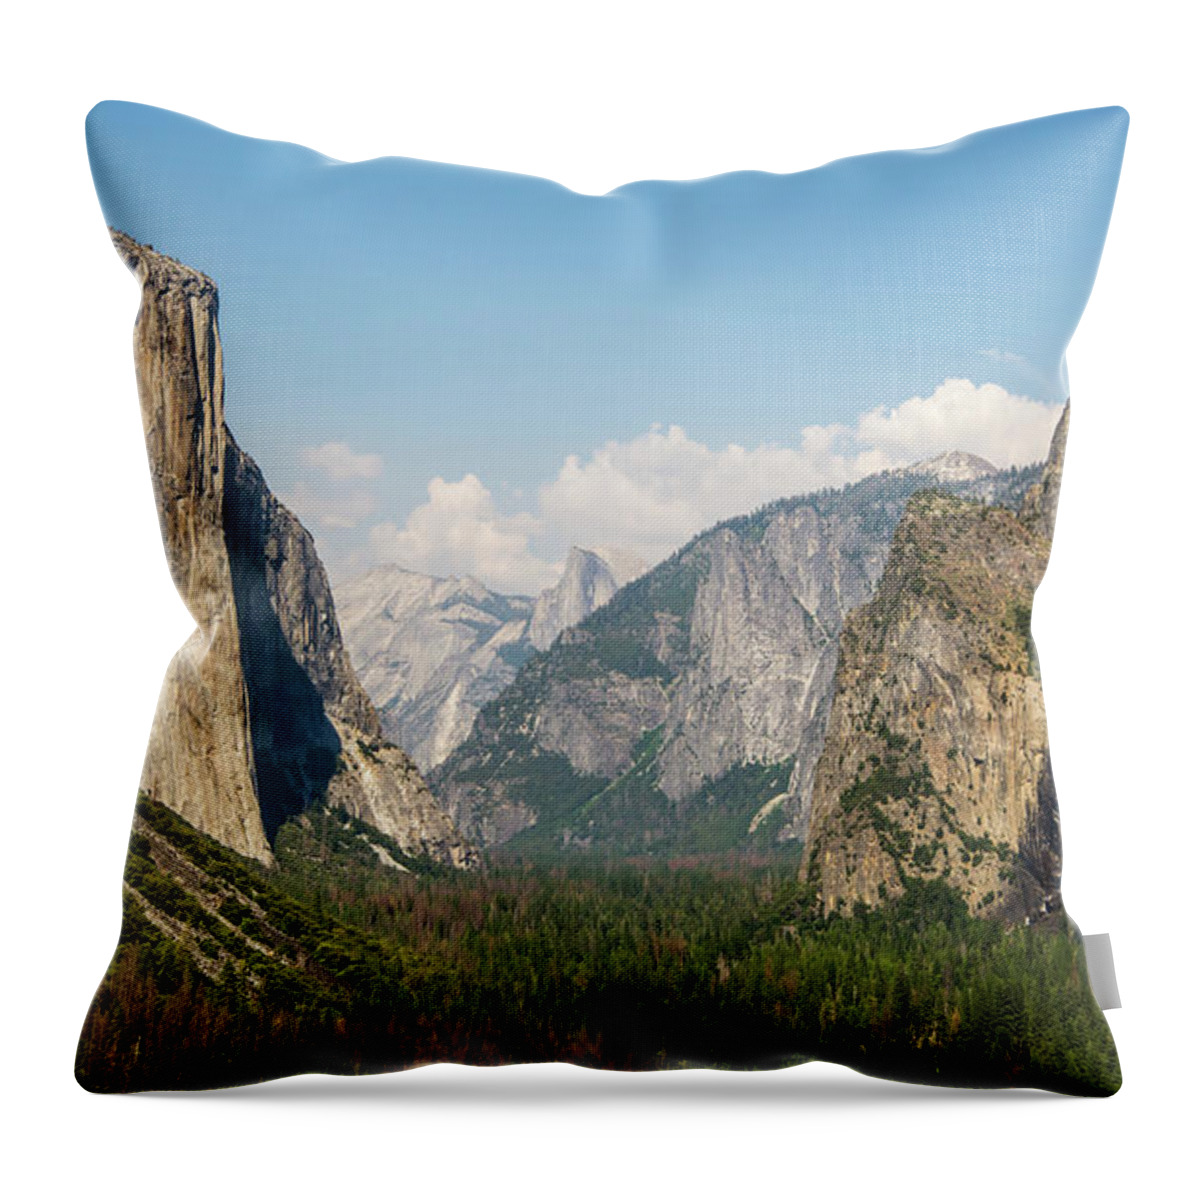 Yosemite Tunnel View With Bridalveil Rainbow By Michael Tidwell Throw Pillow featuring the photograph Yosemite Tunnel View with Bridalveil Rainbow by Michael Tidwell by Michael Tidwell